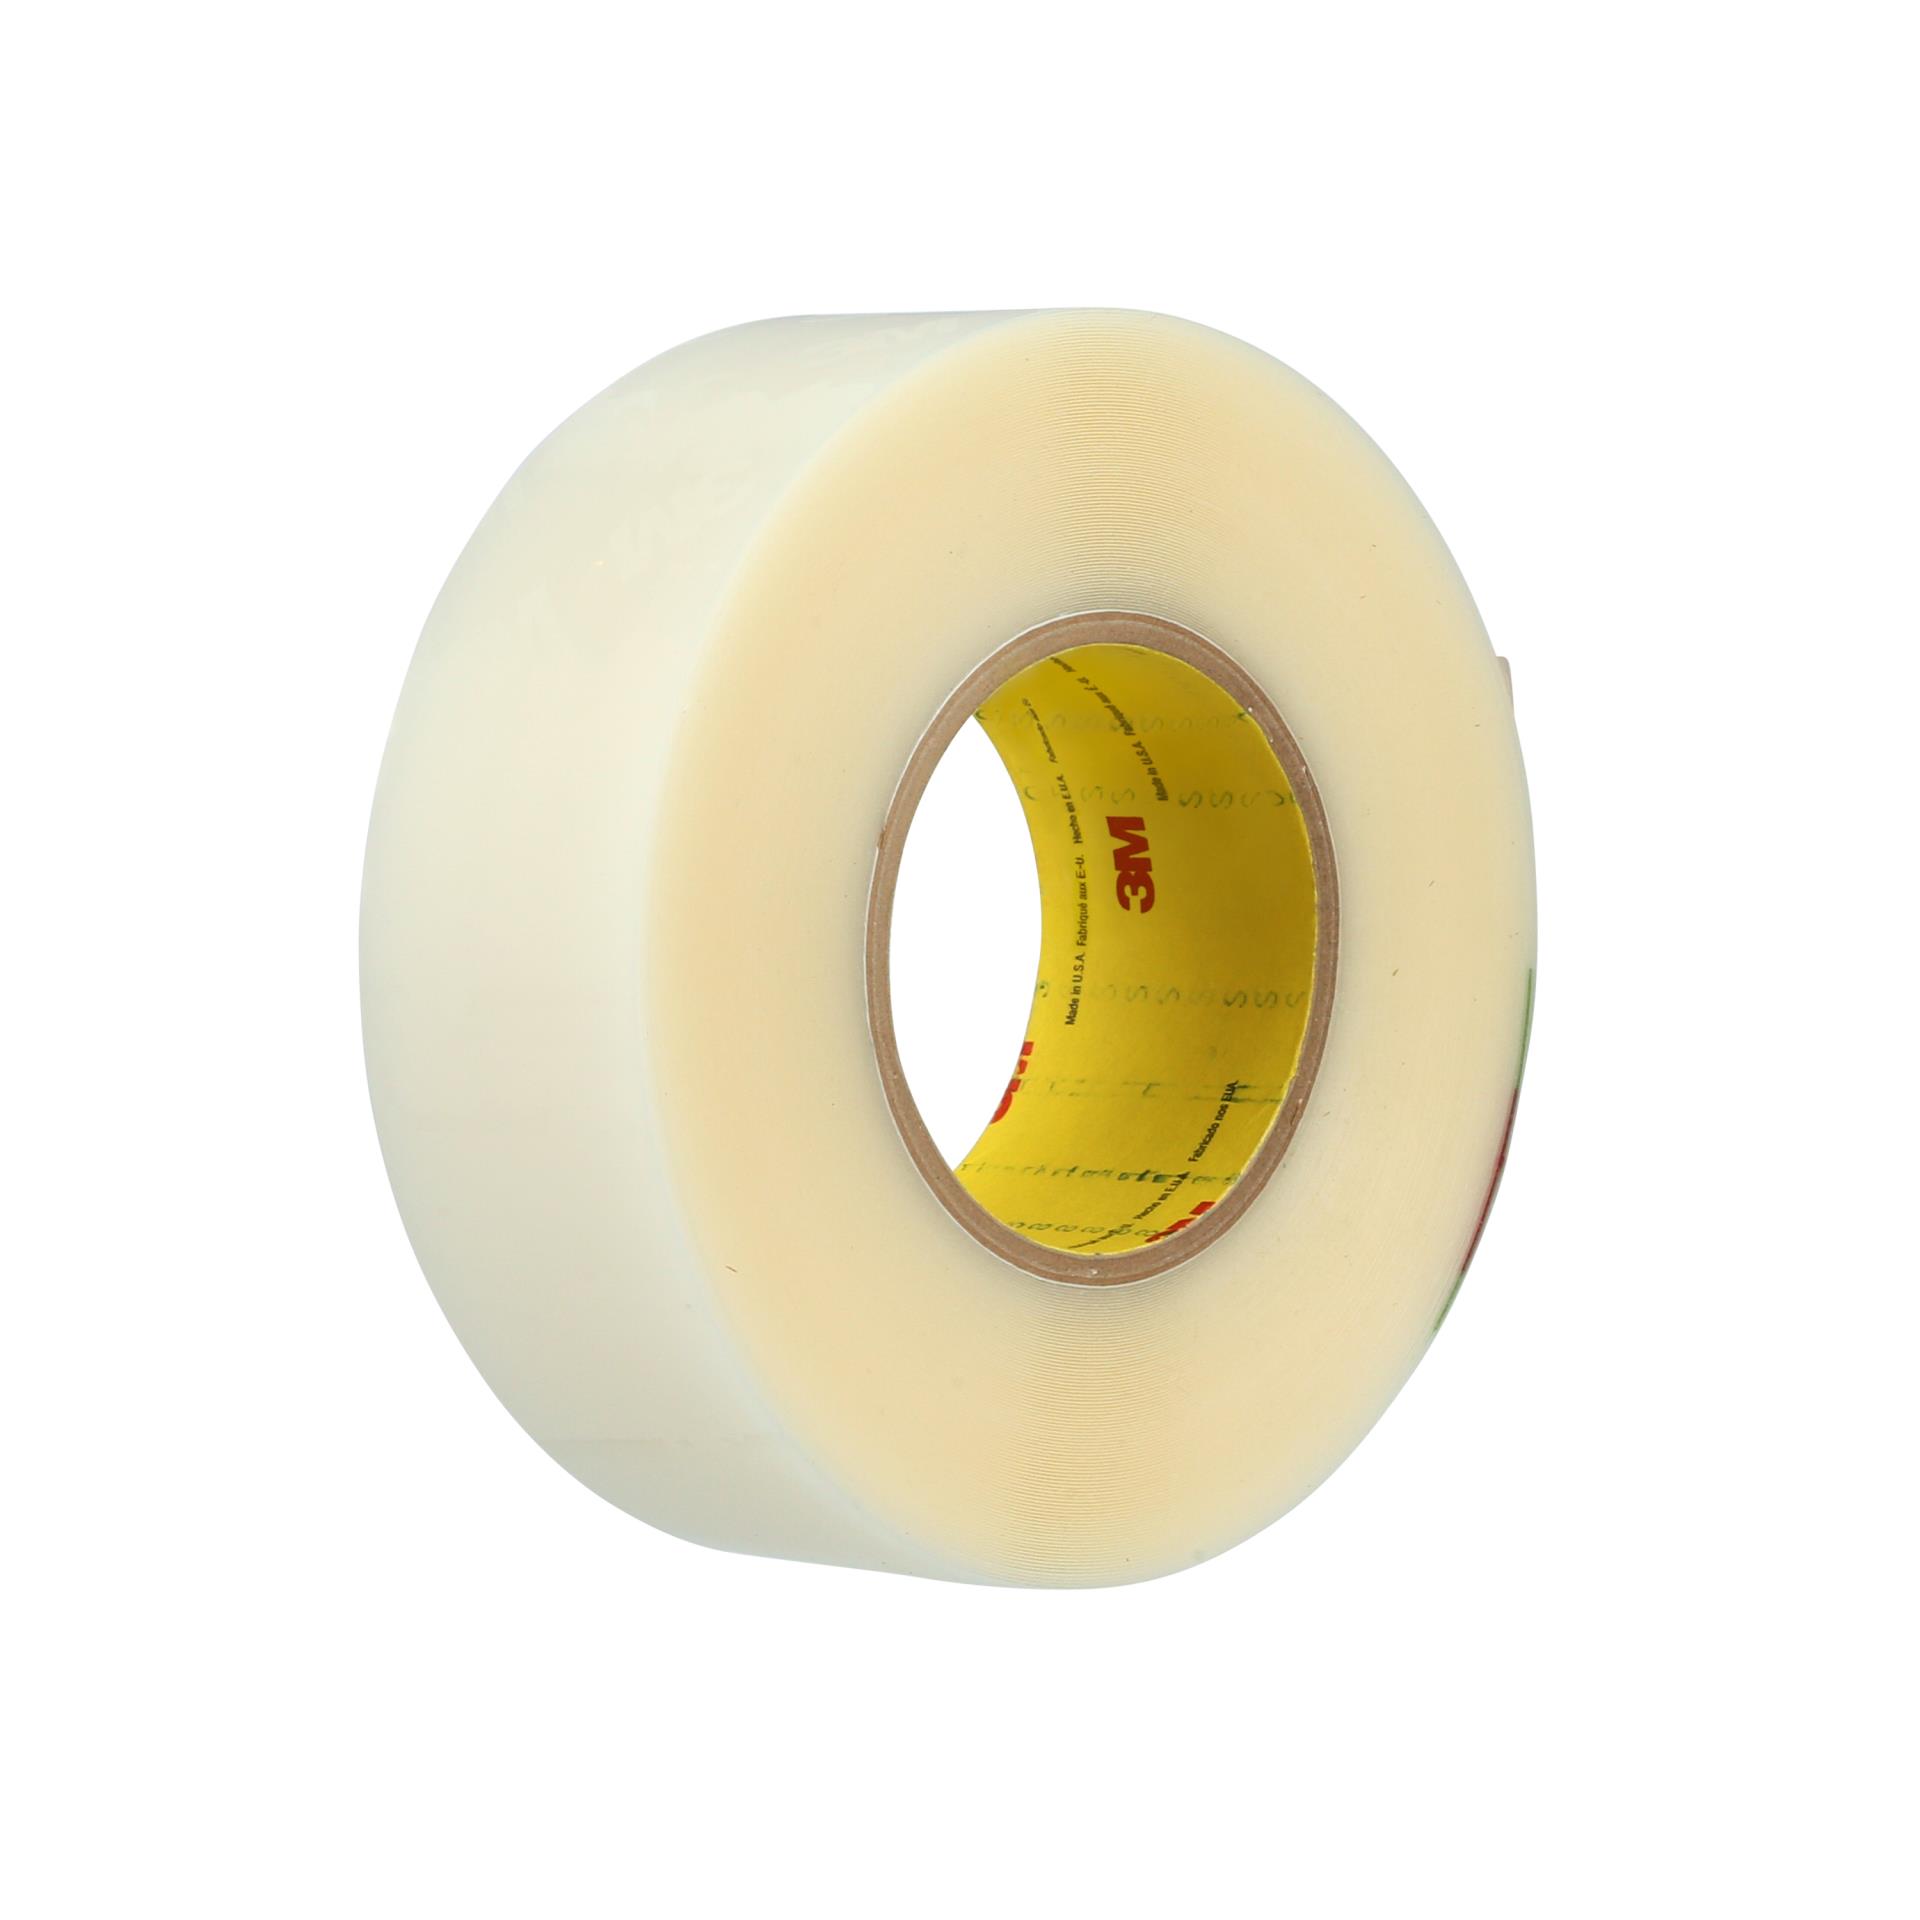 Sign Hanging Supplies - Scotch® 665 Double-Sided Tape with Dispenser - 1/2  in.W x 7 yds. - 1 in. Core - 3 Rolls/Pkg